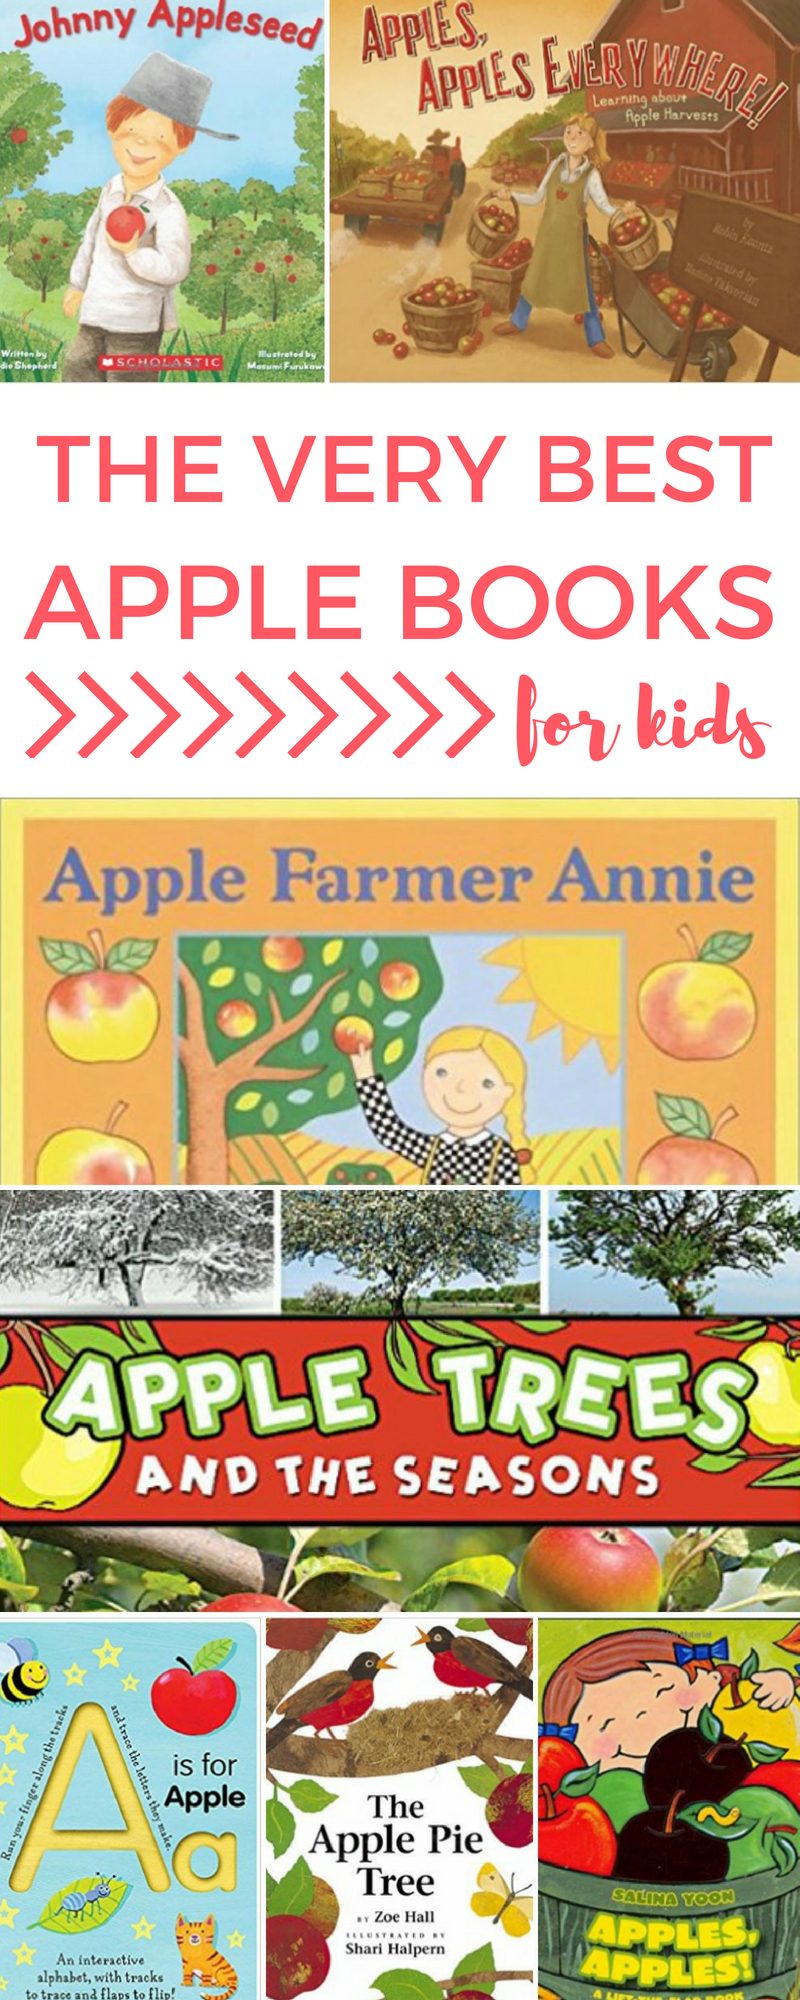 The Very Best Apple Books for Kids